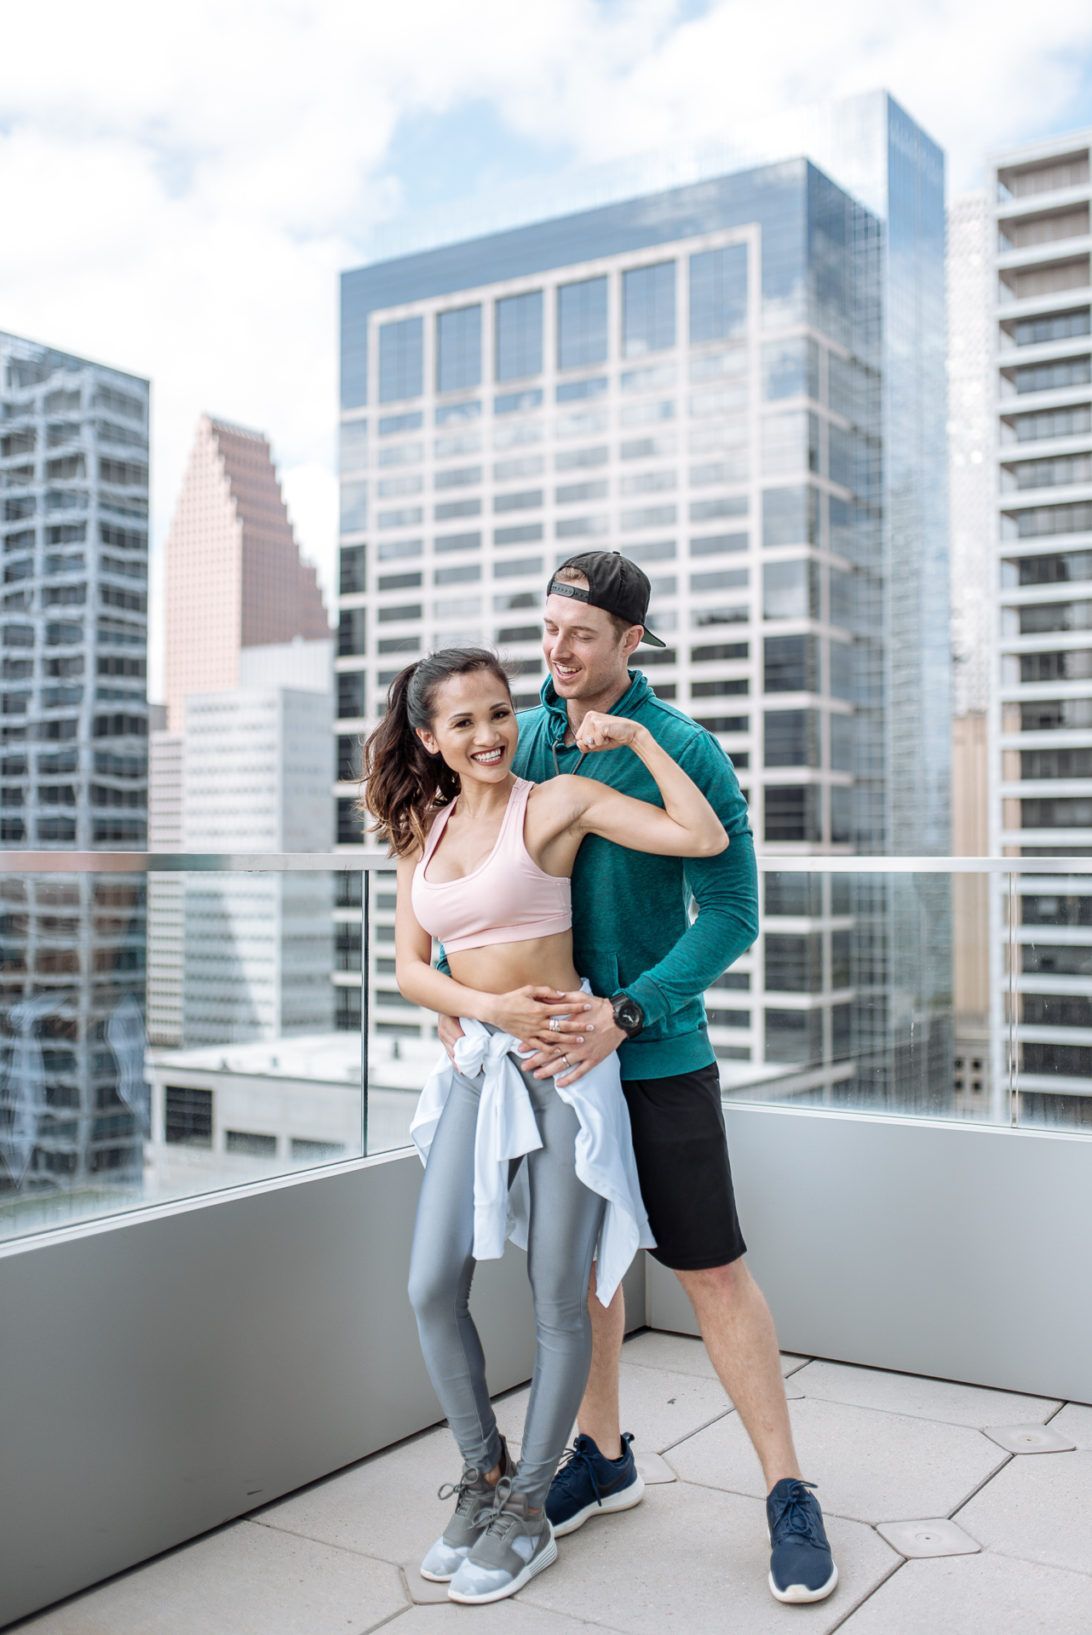 6 Benefits of Working Out With Your Significant Other - Fitness Friday | Dawn P. Darnell -   12 fitness Couples benefits of ideas